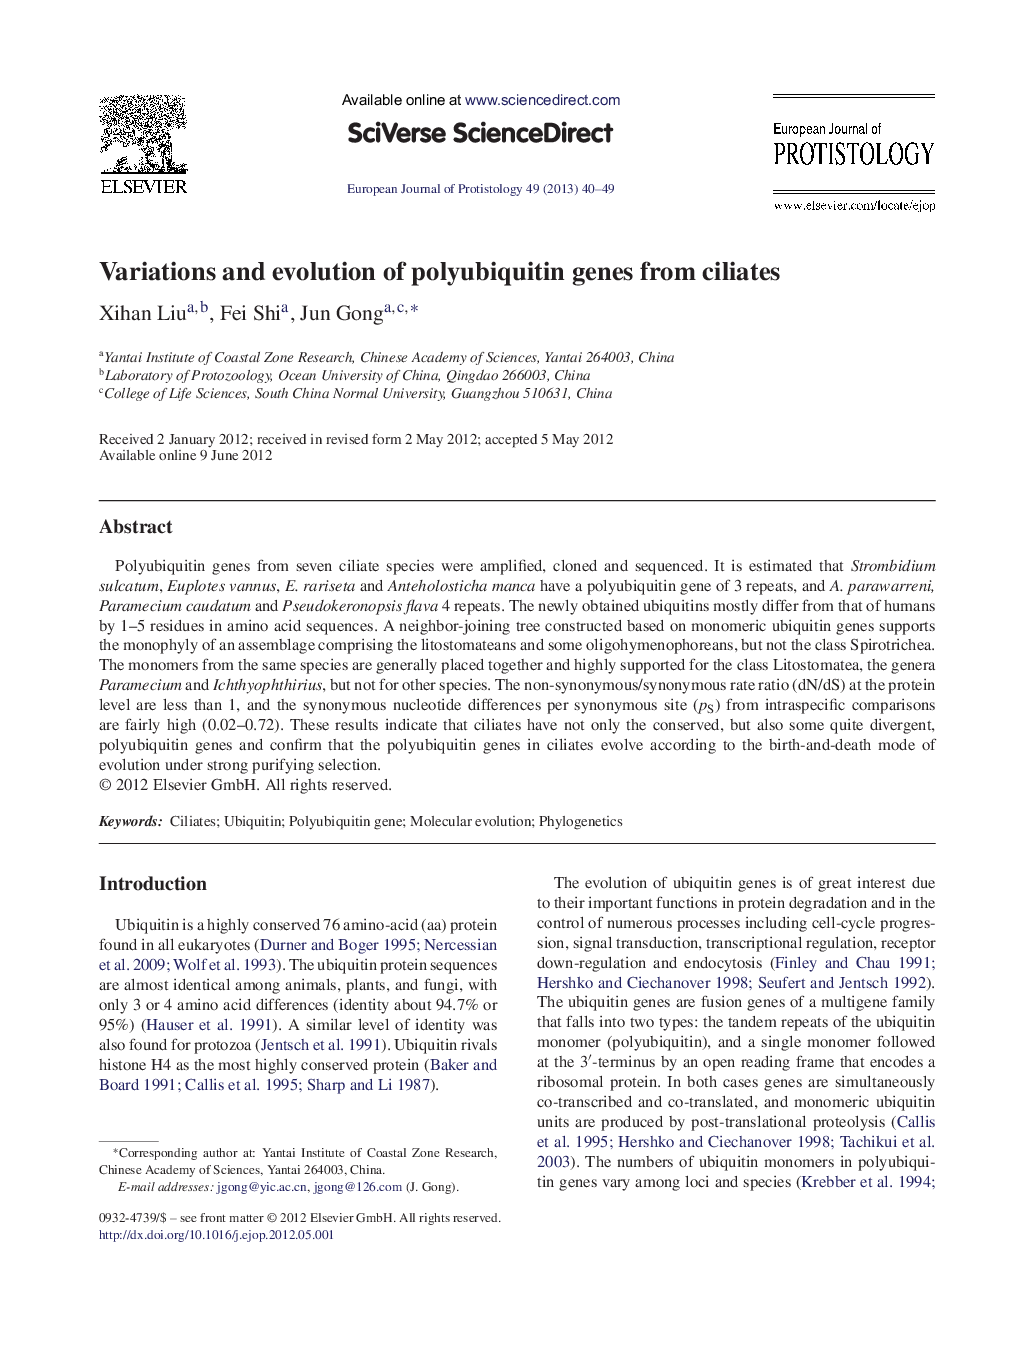 Variations and evolution of polyubiquitin genes from ciliates